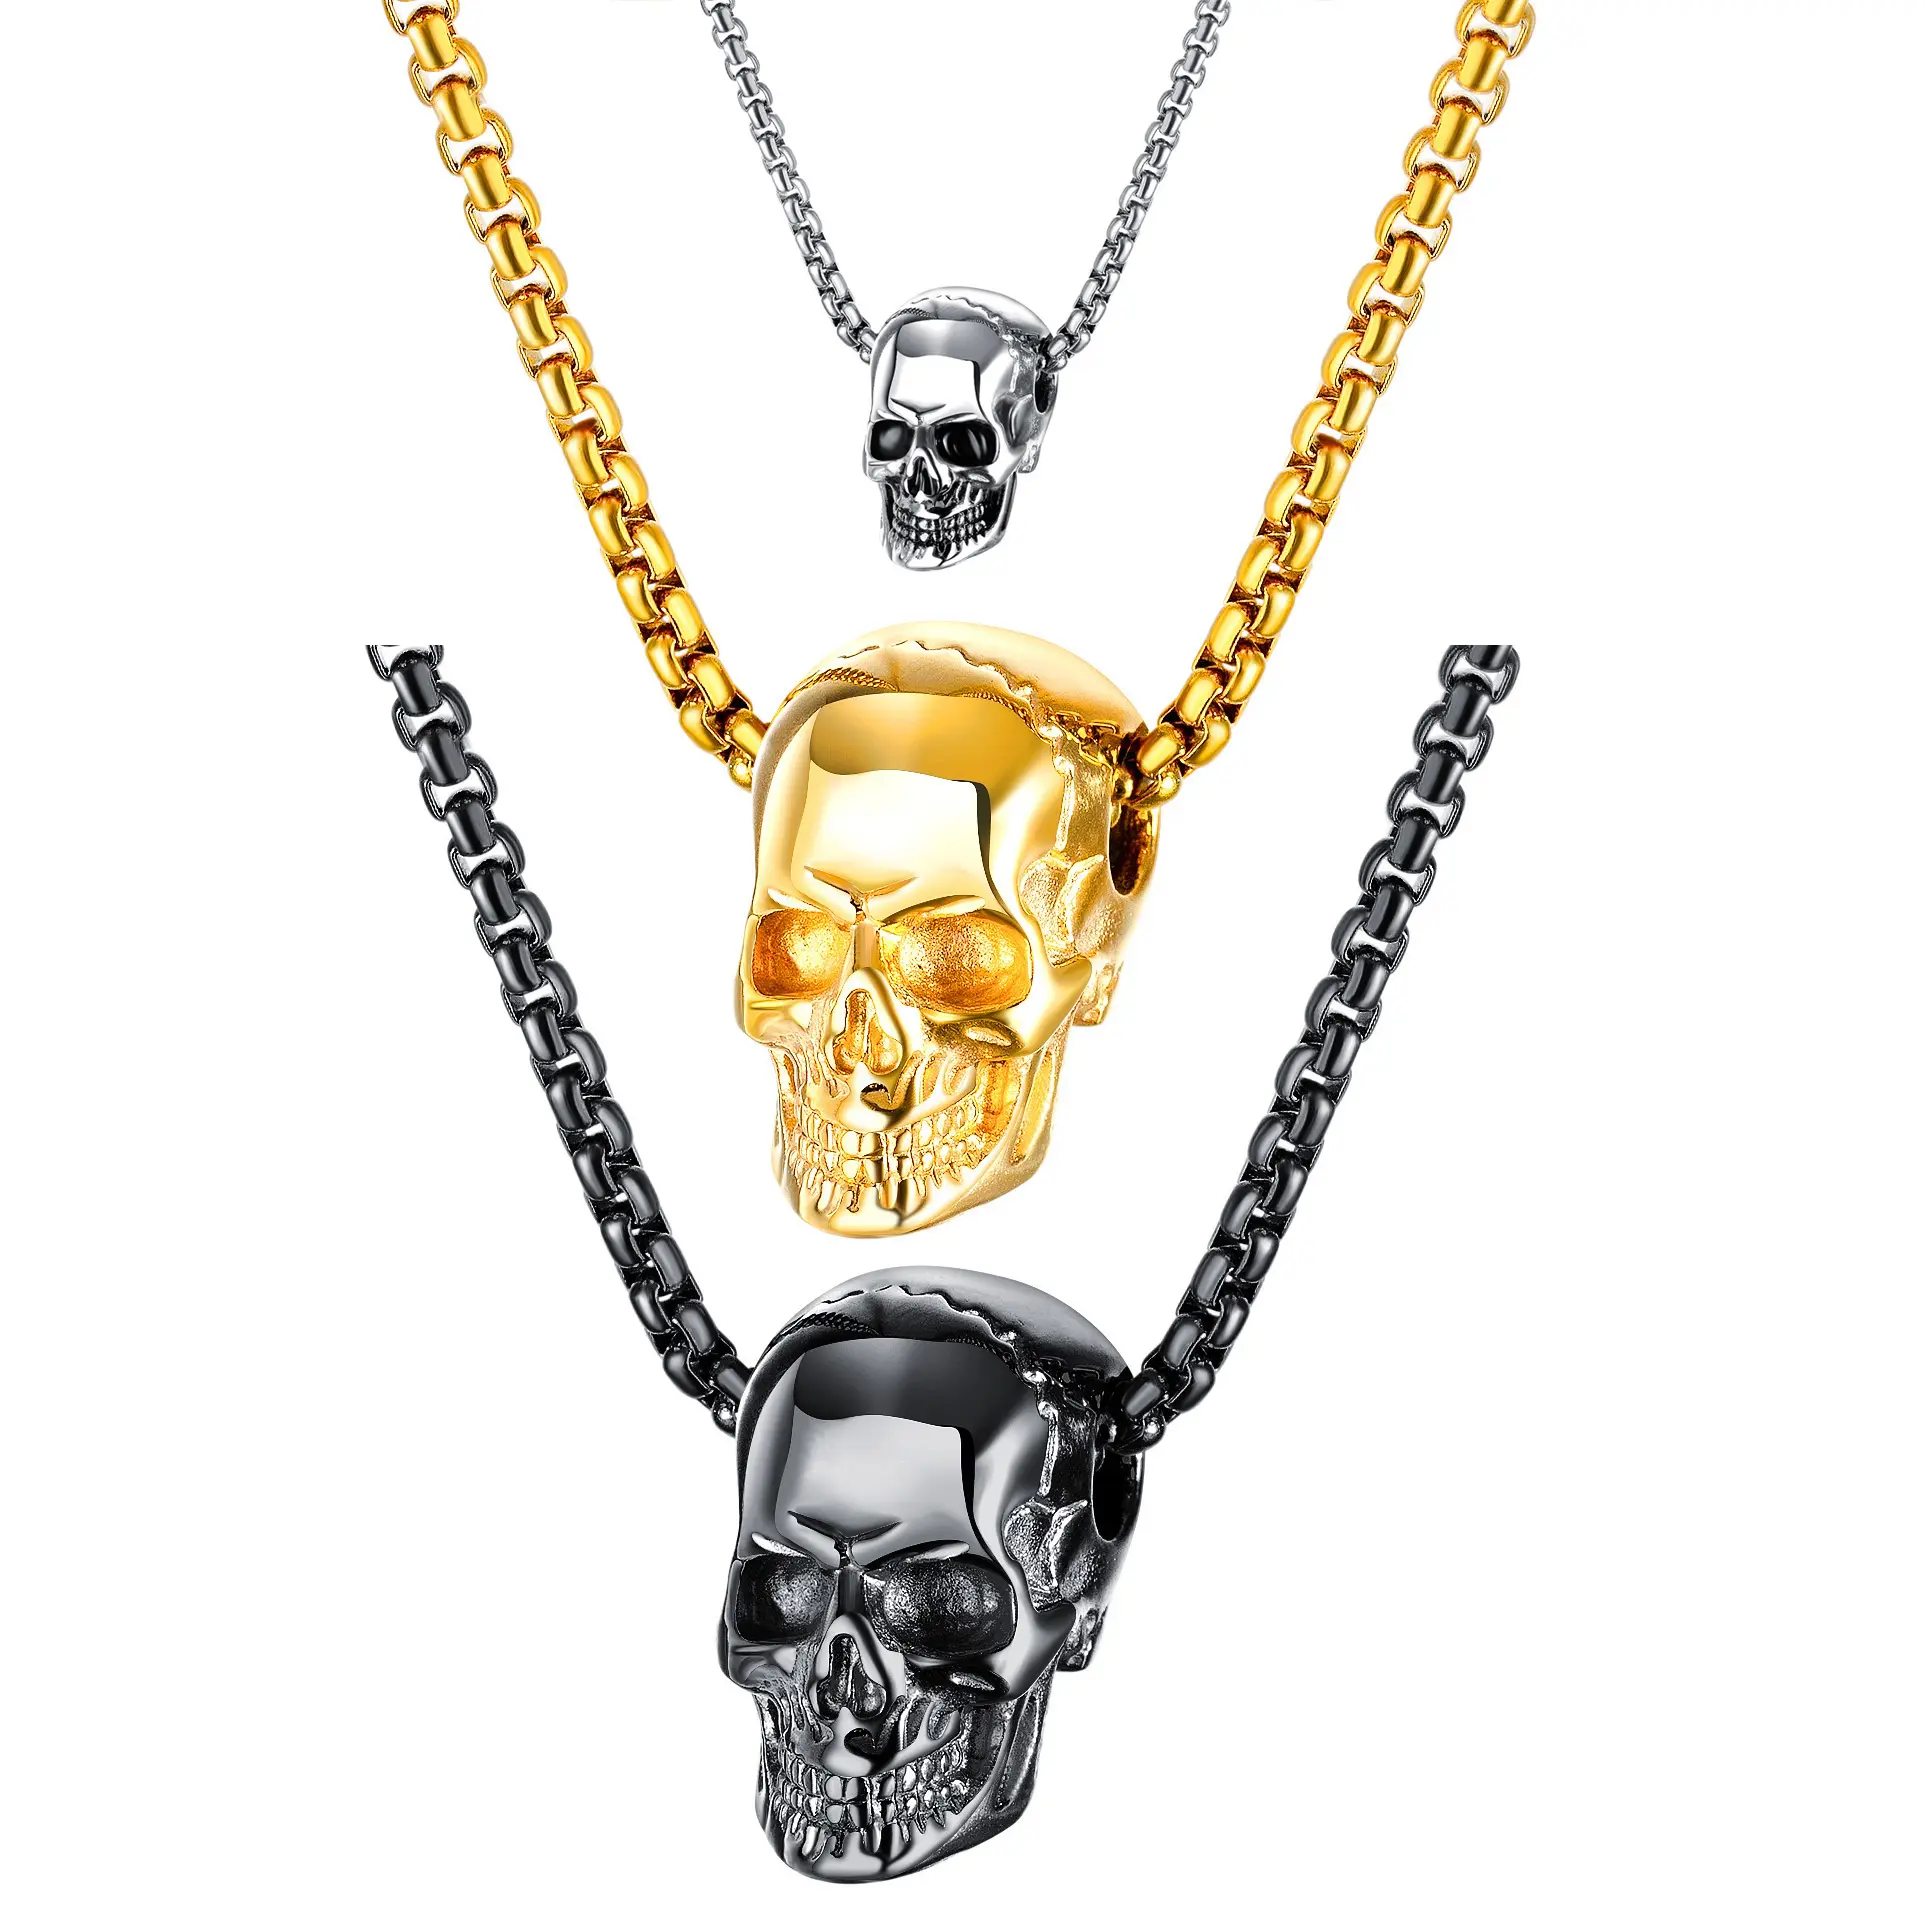 Skull Head Pendant Necklace Hiphop Rock Design Wholesale Titanium Stainless Steel Punk Silver Black Gold Jewelry Necklaces Gift